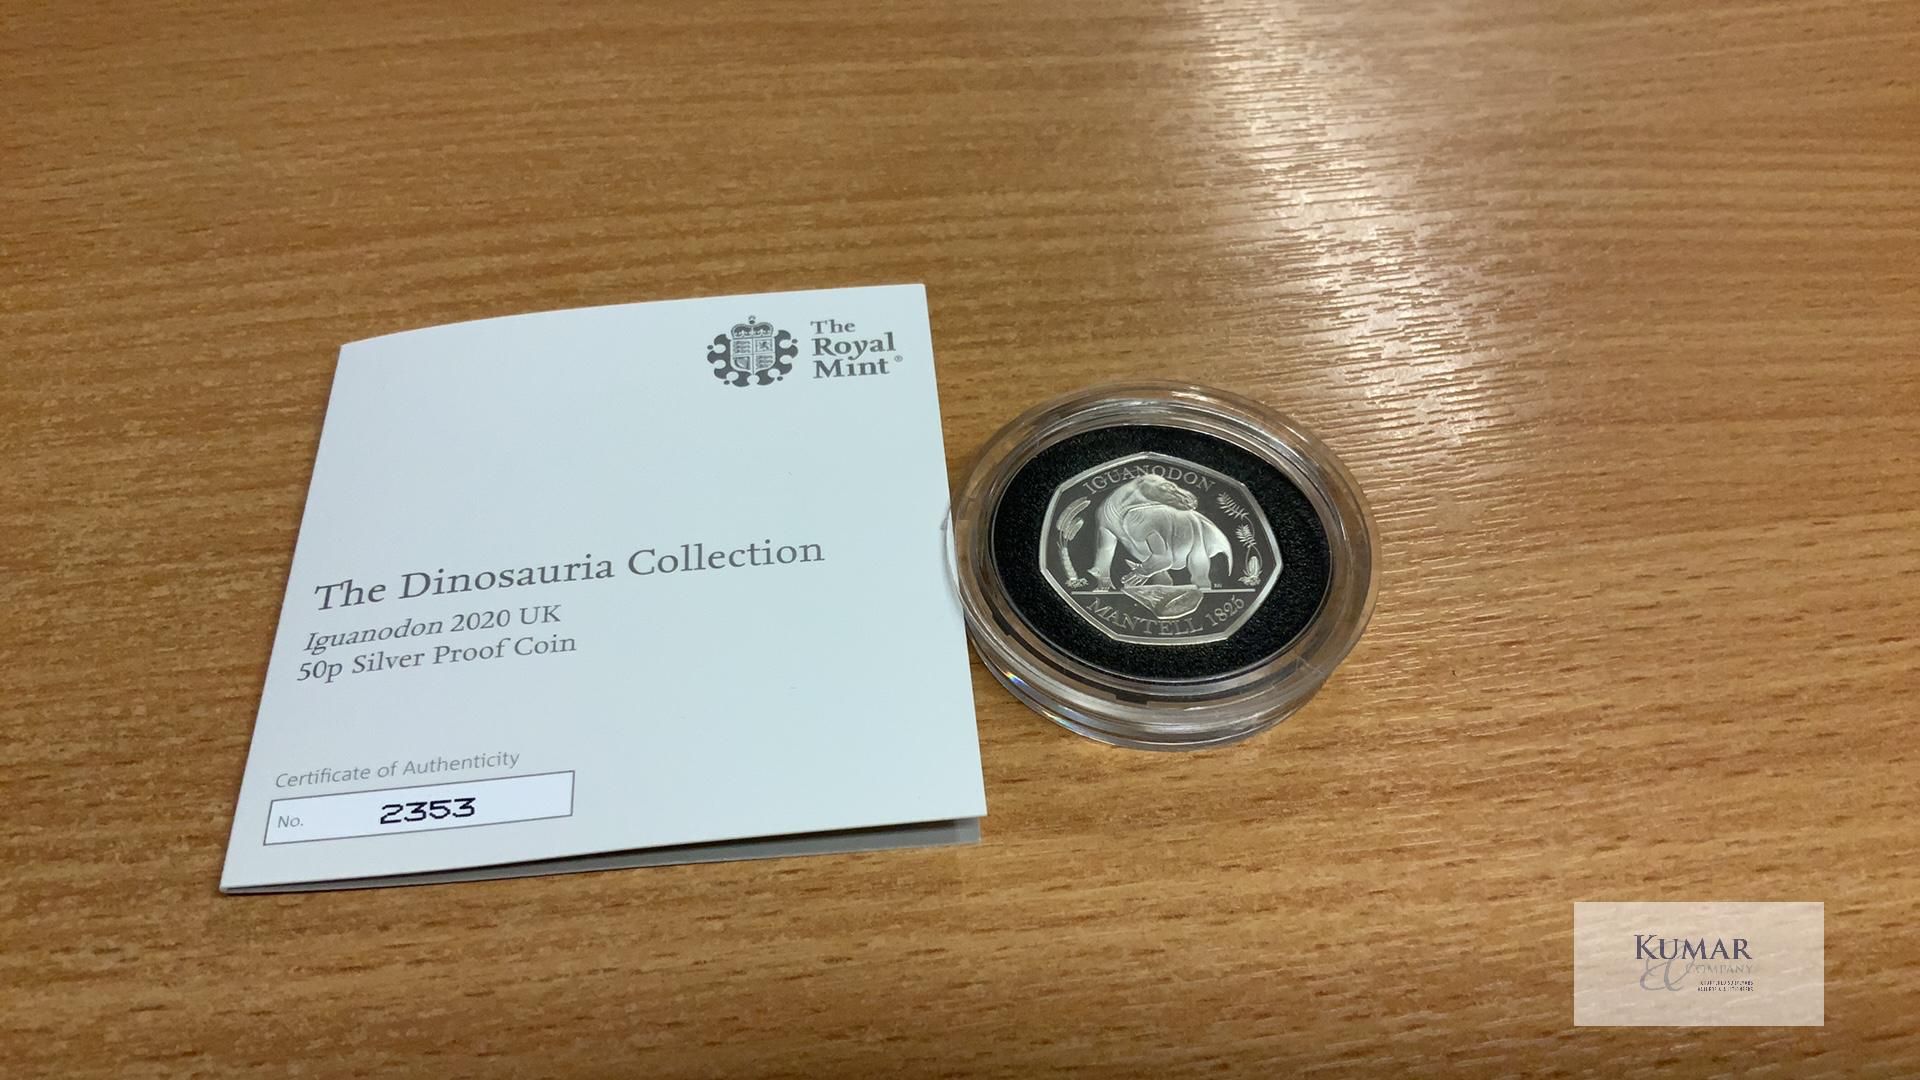 The Royal Mint Coin- Tales of the Earth - The Dinosauria Collection Iguanodon 2020 UK 50p Silver - Image 3 of 4